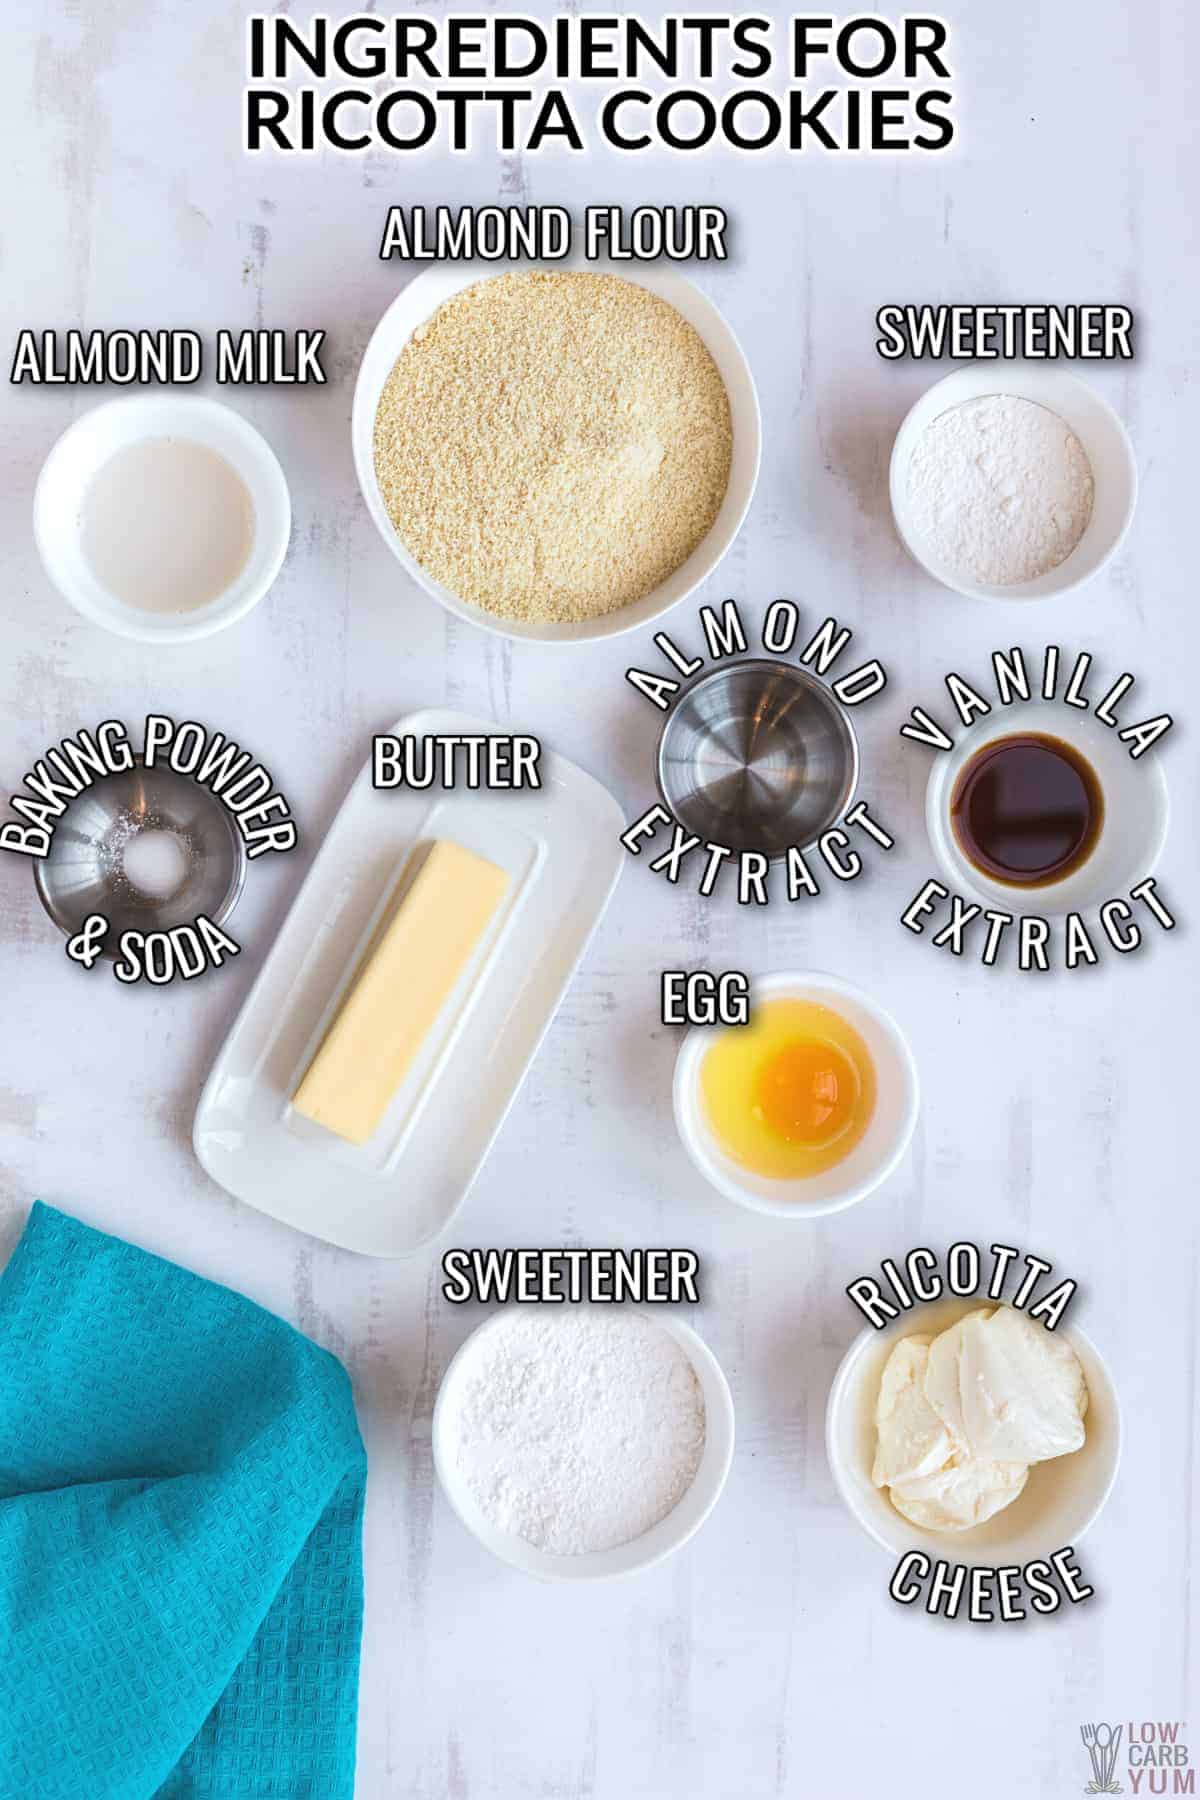 ingredients for ricotta cheese cookies recipe